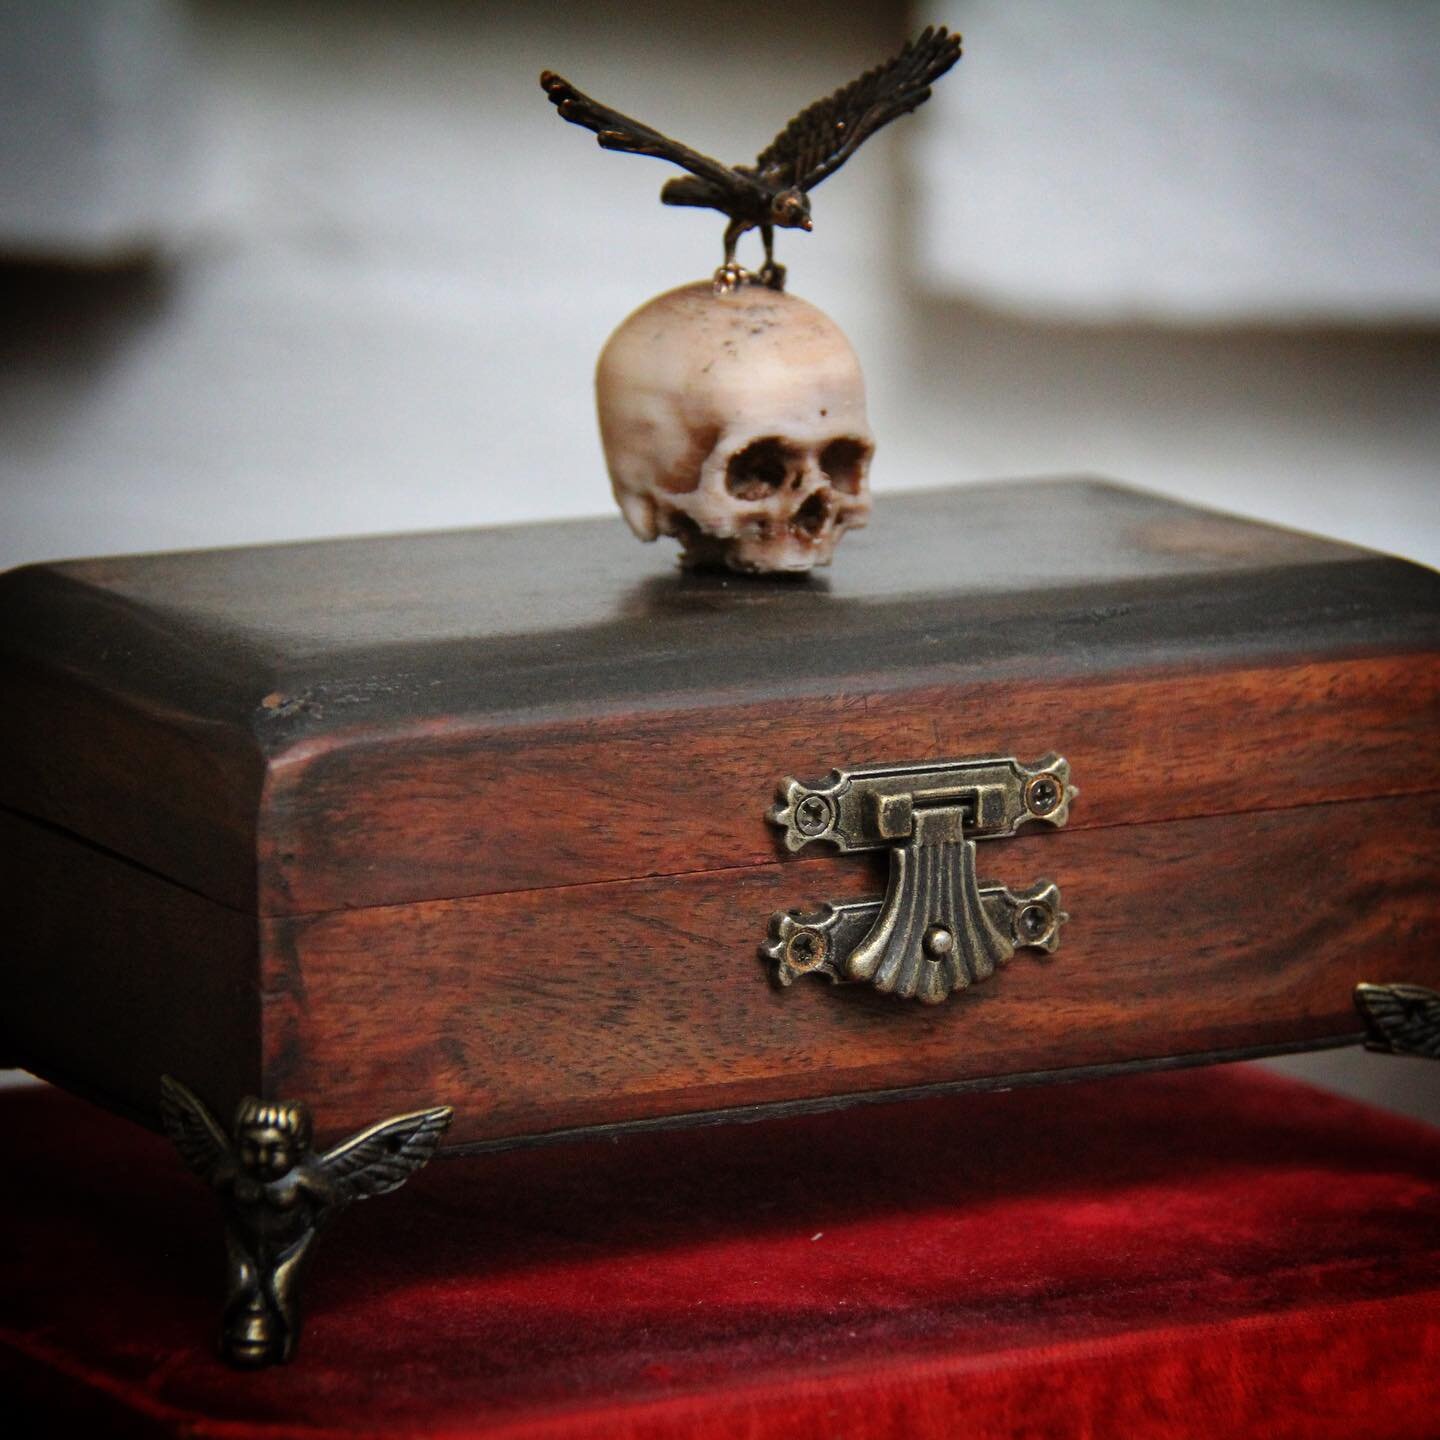 A one-off box I made for &lsquo;A Book at Midnight&rsquo; Edgar Allan Poe Edition.  #poe #edgarallanpoe #theraven #classichorror #gothicstyle #skullsandravens #eapoe #magicboxes